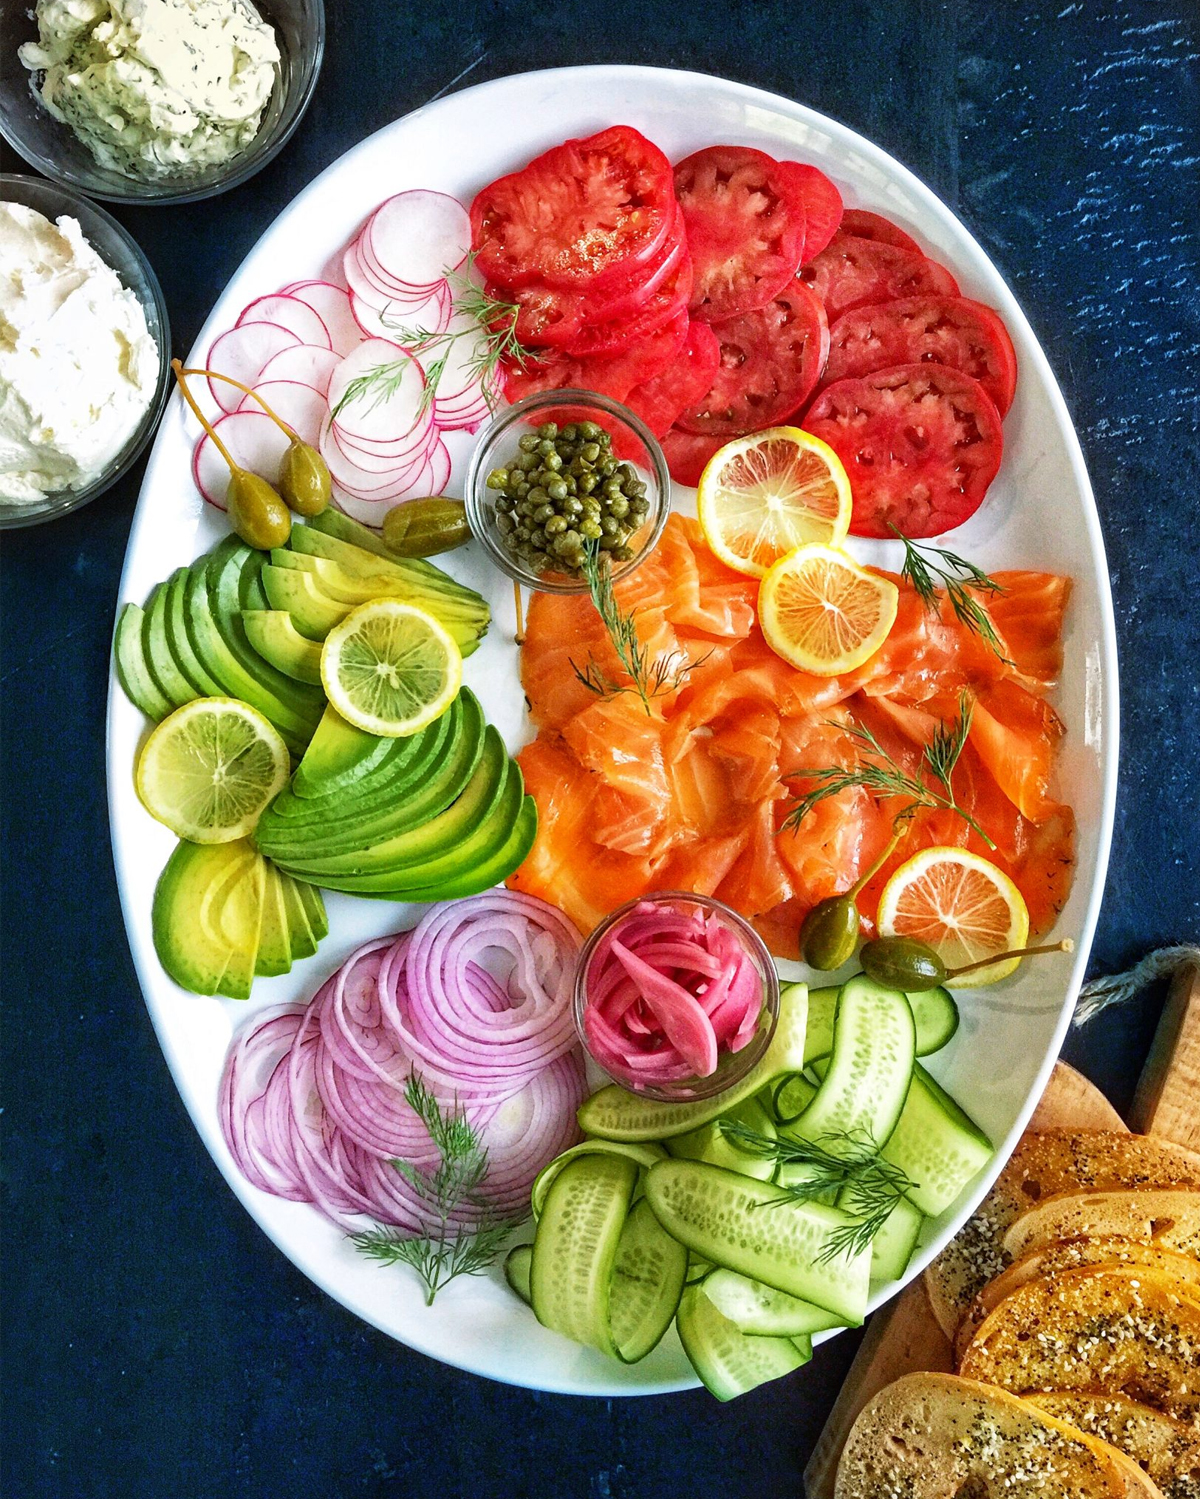 The Delicious Life displays salmon, tomato, lemons, avocado, and onions, on their charcuterie board.